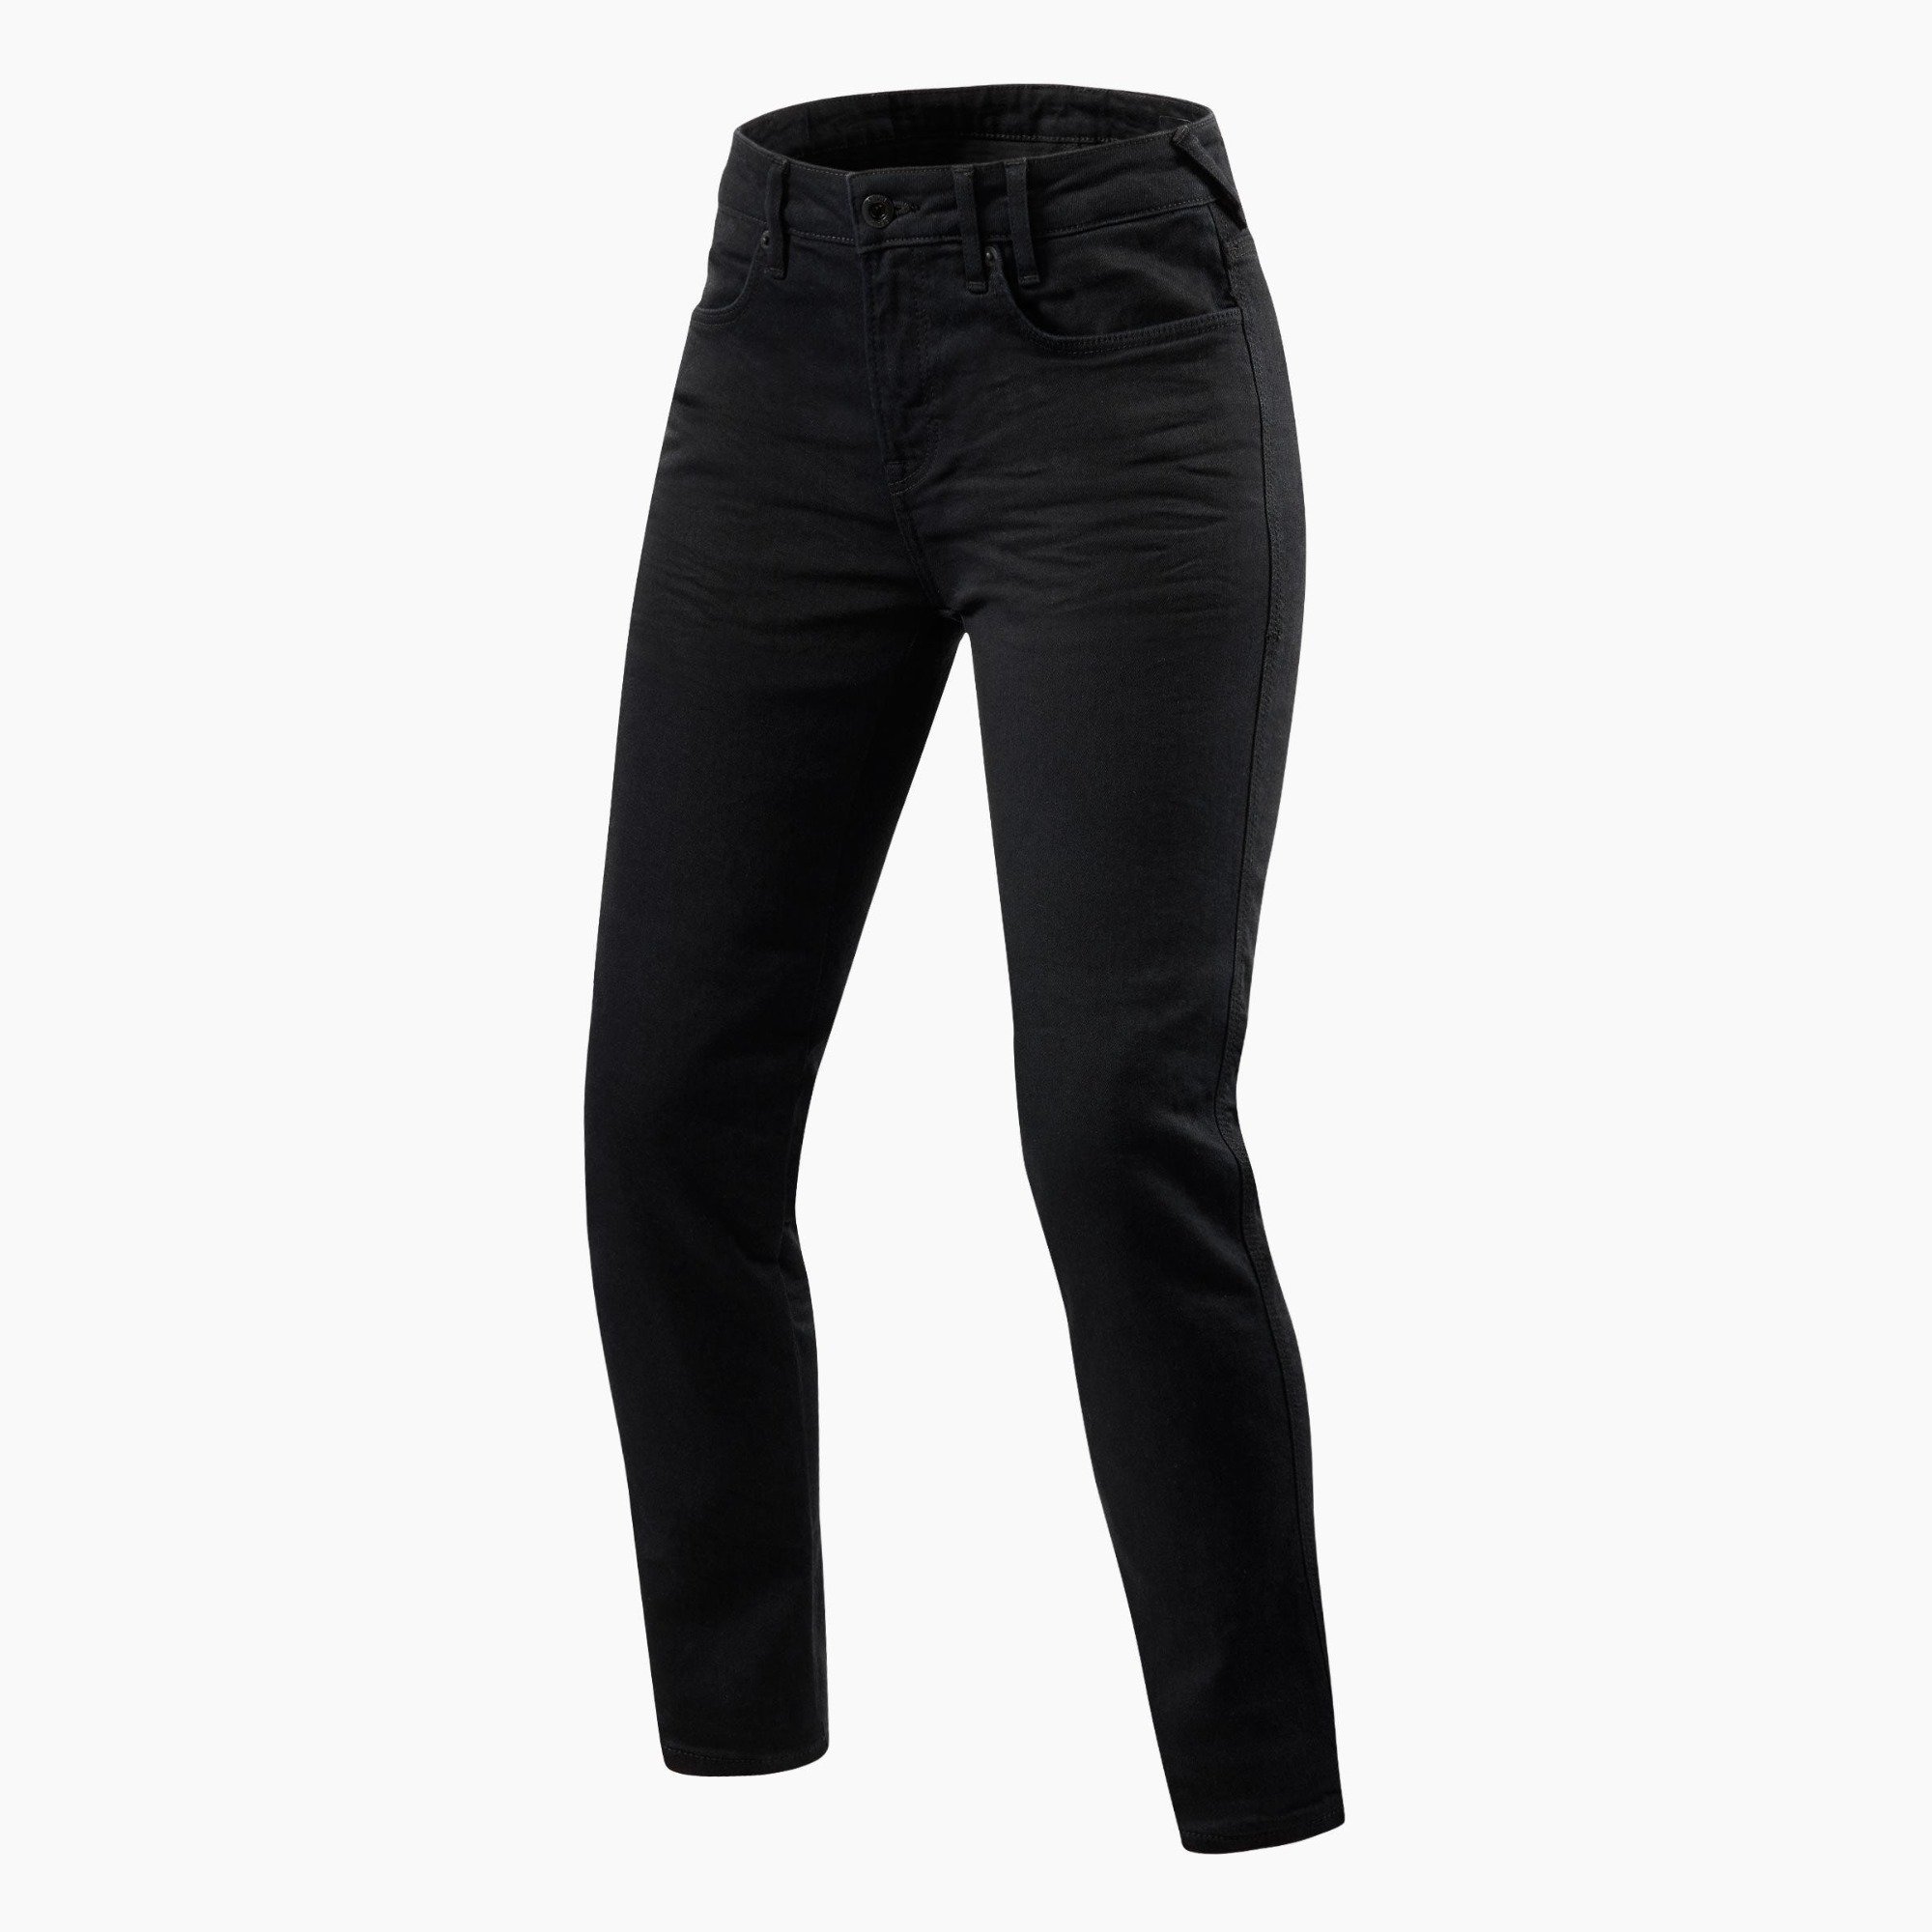 Image of REV'IT! Jeans Maple 2 Ladies SK Black Motorcycle Jeans Size L32/W32 ID 8700001342261